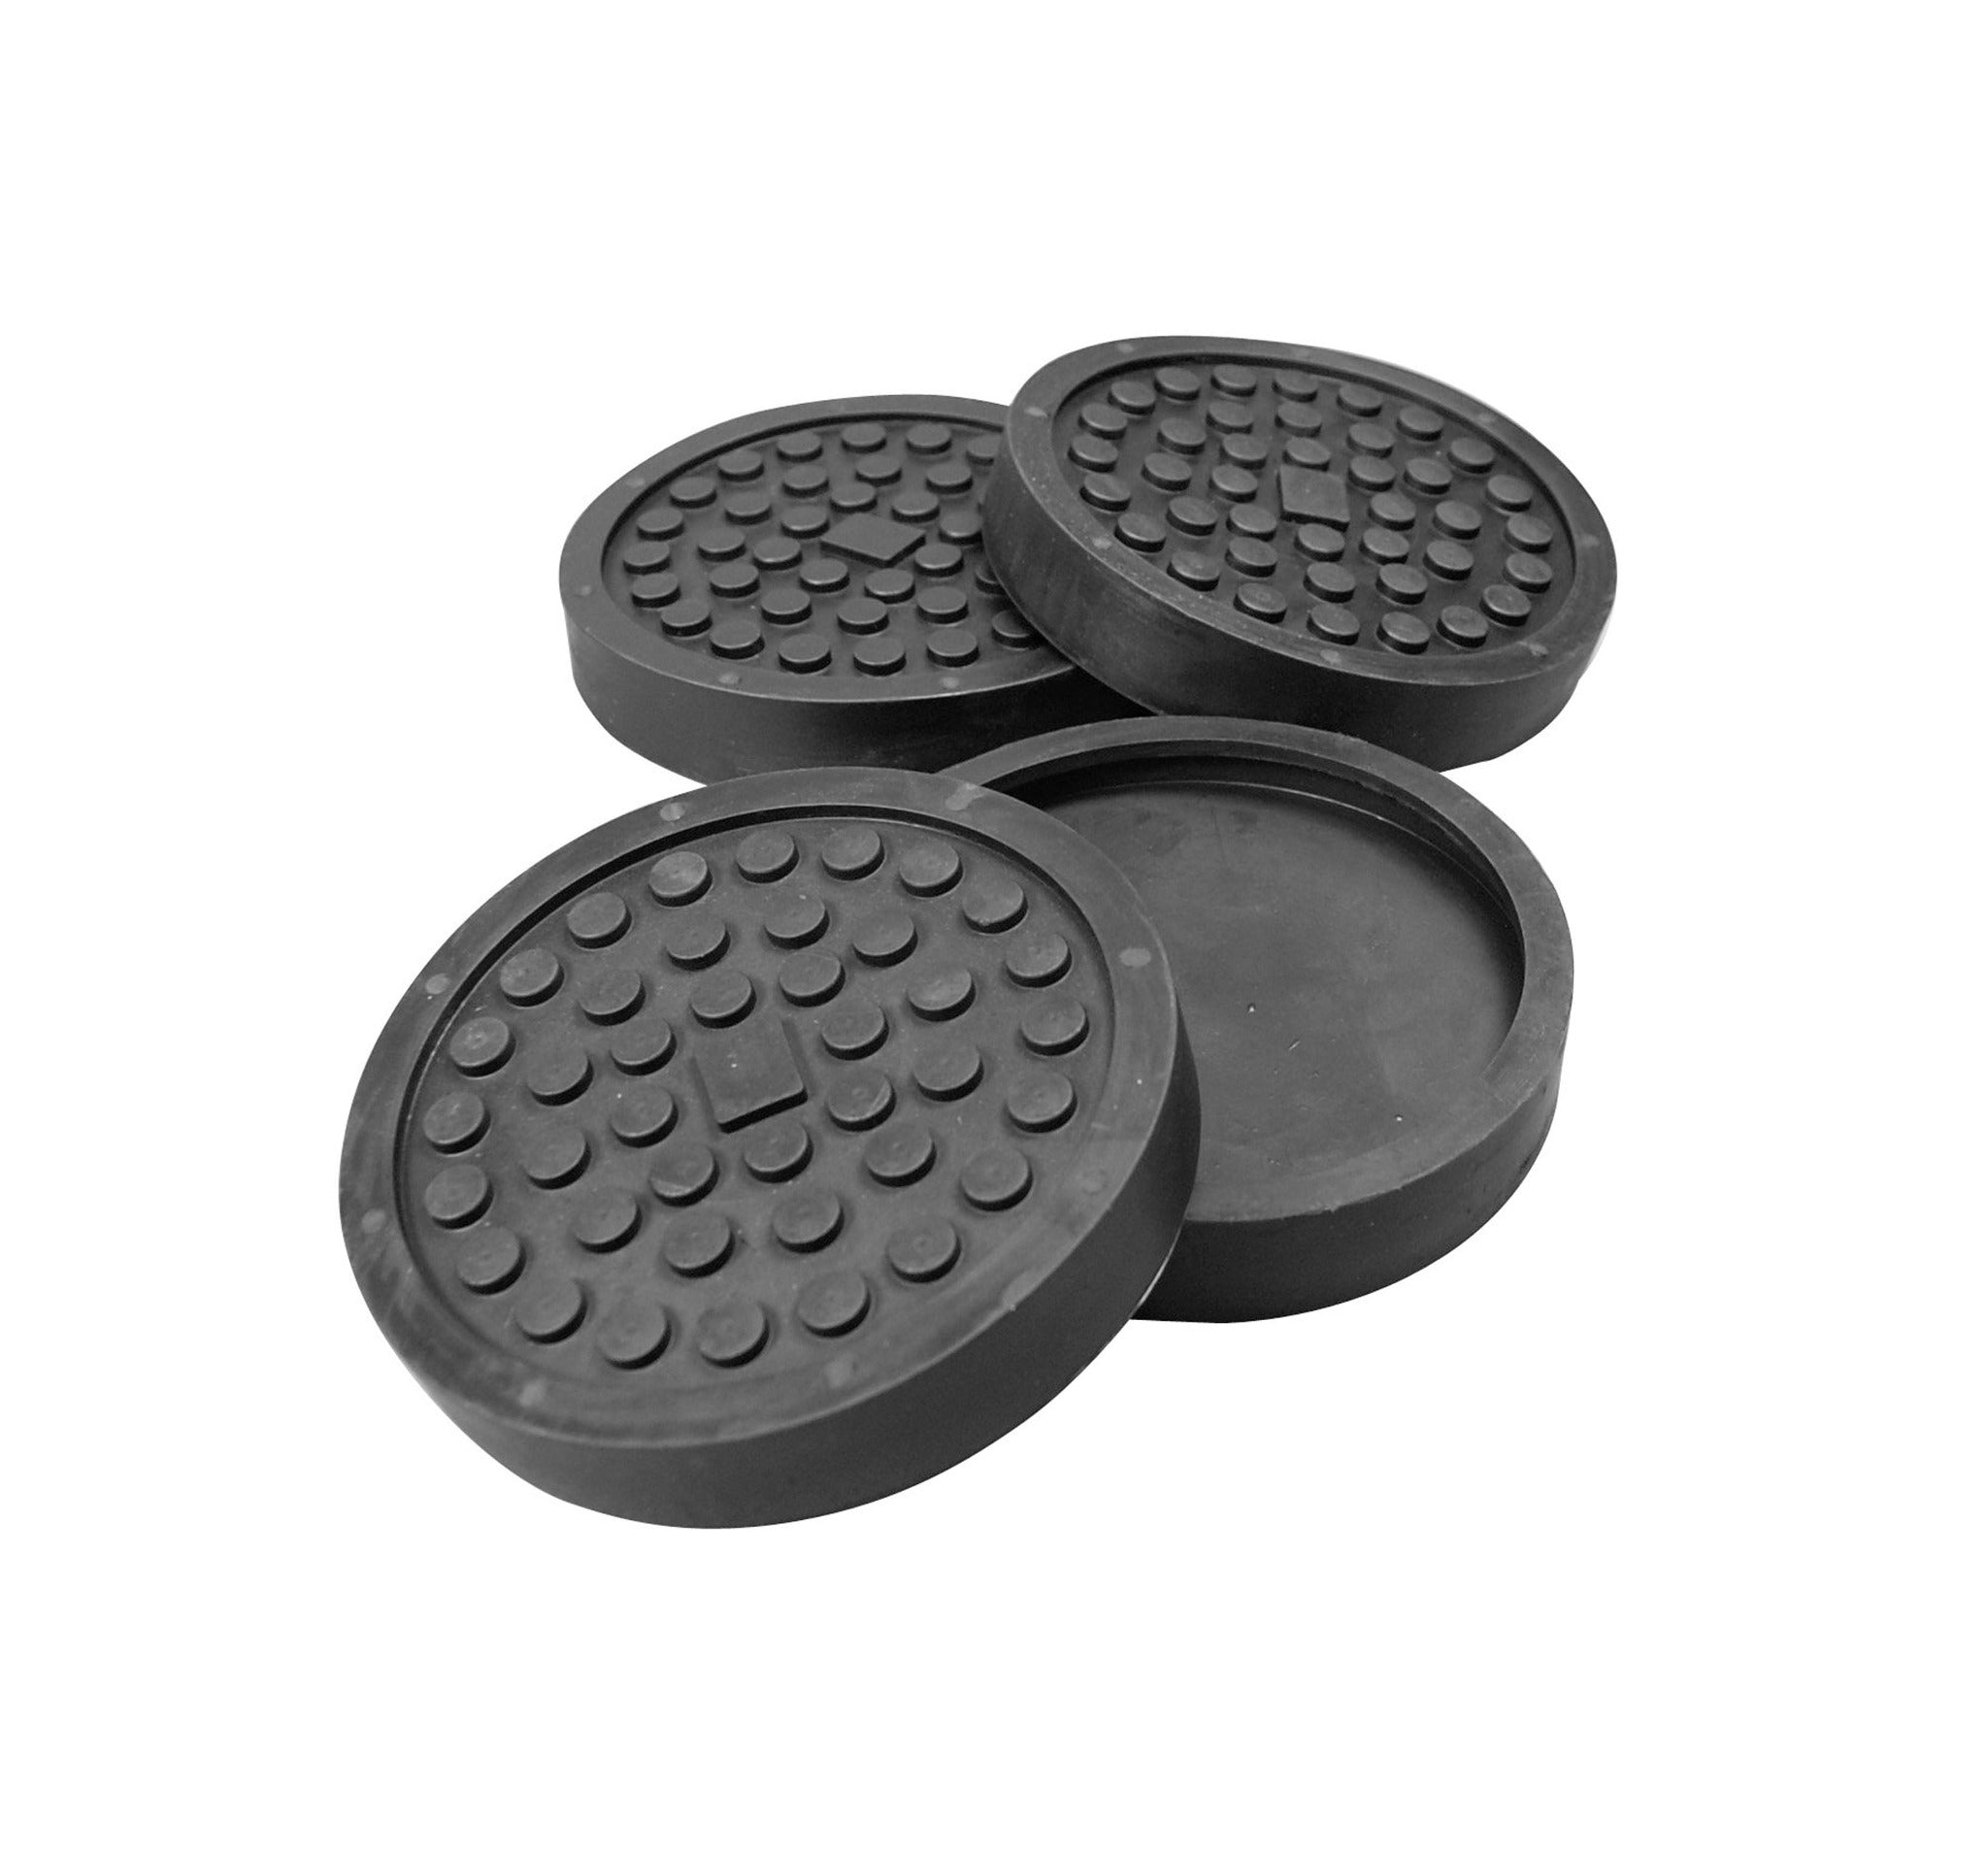 ALM Rubber Arm Pad (Pack of 4)